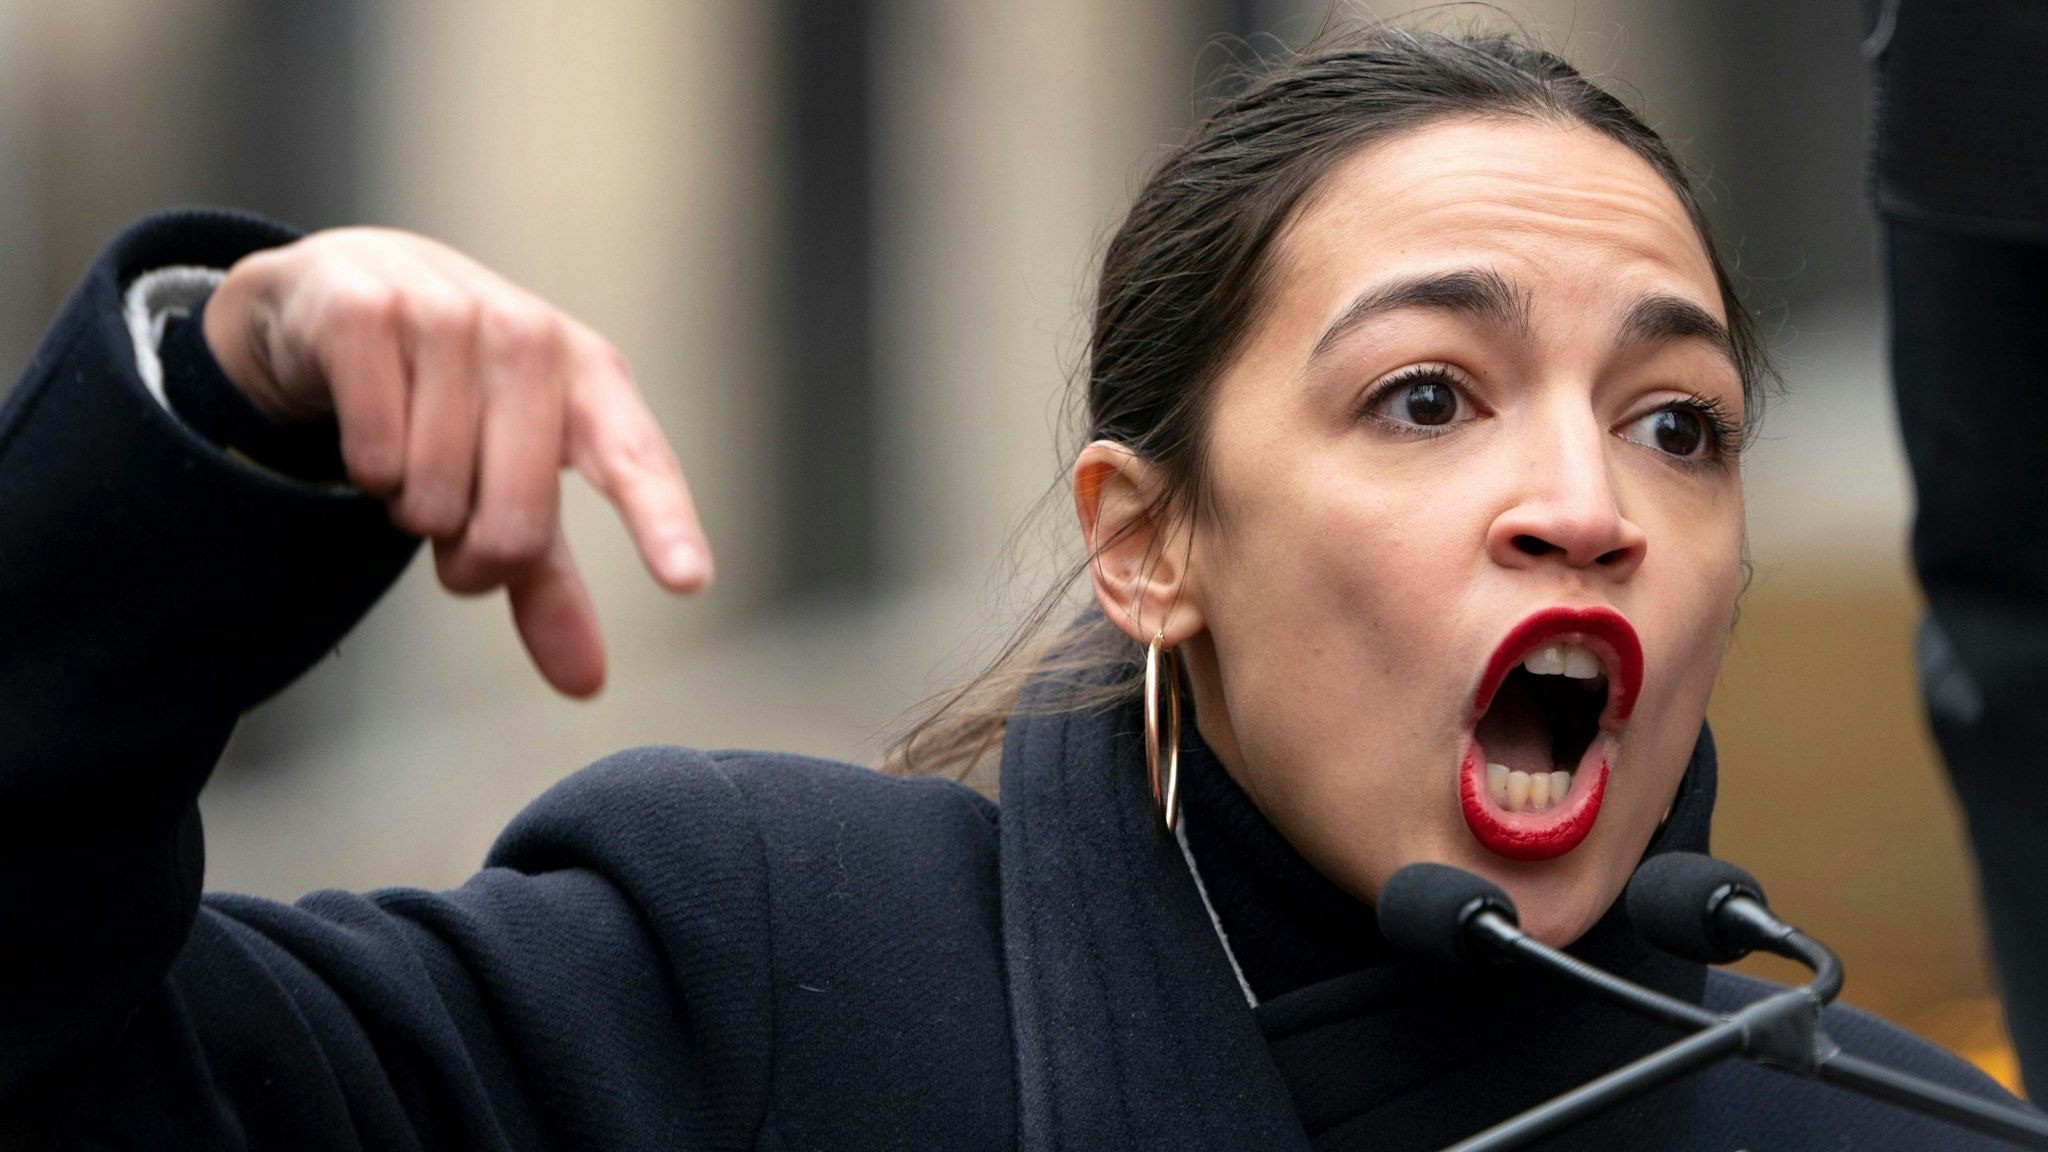 US Representative Alexandria Ocasio-Cortez (D-NY) speaks during the Women's March in New York on January 19, 2019.